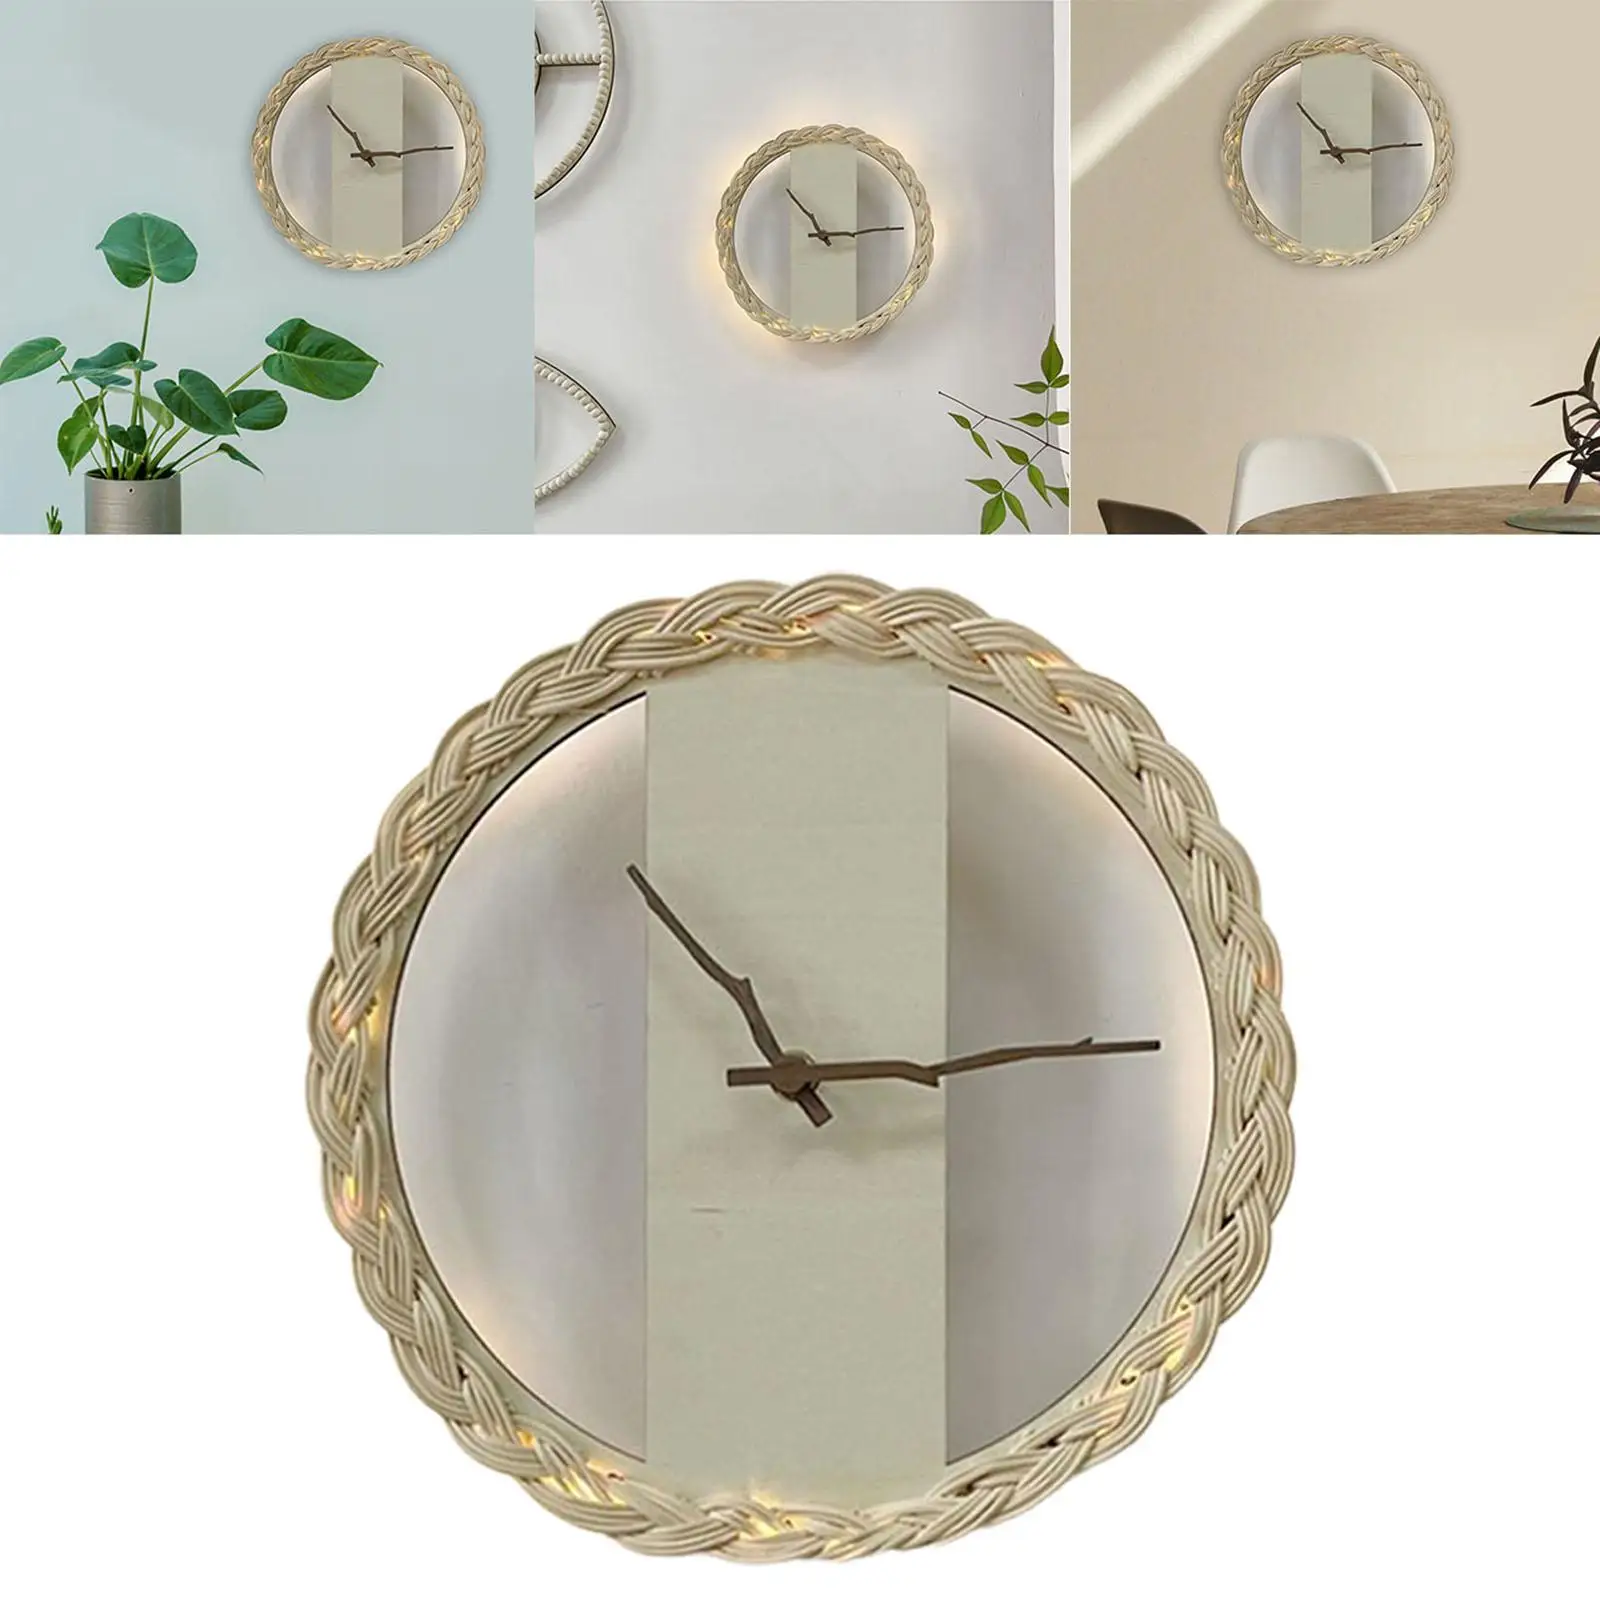 Round Rustic Woven Clock Quiet Wooden Durable Wooden Woven Round Boho Clock for Office Bathroom Restaurant Home Decoration